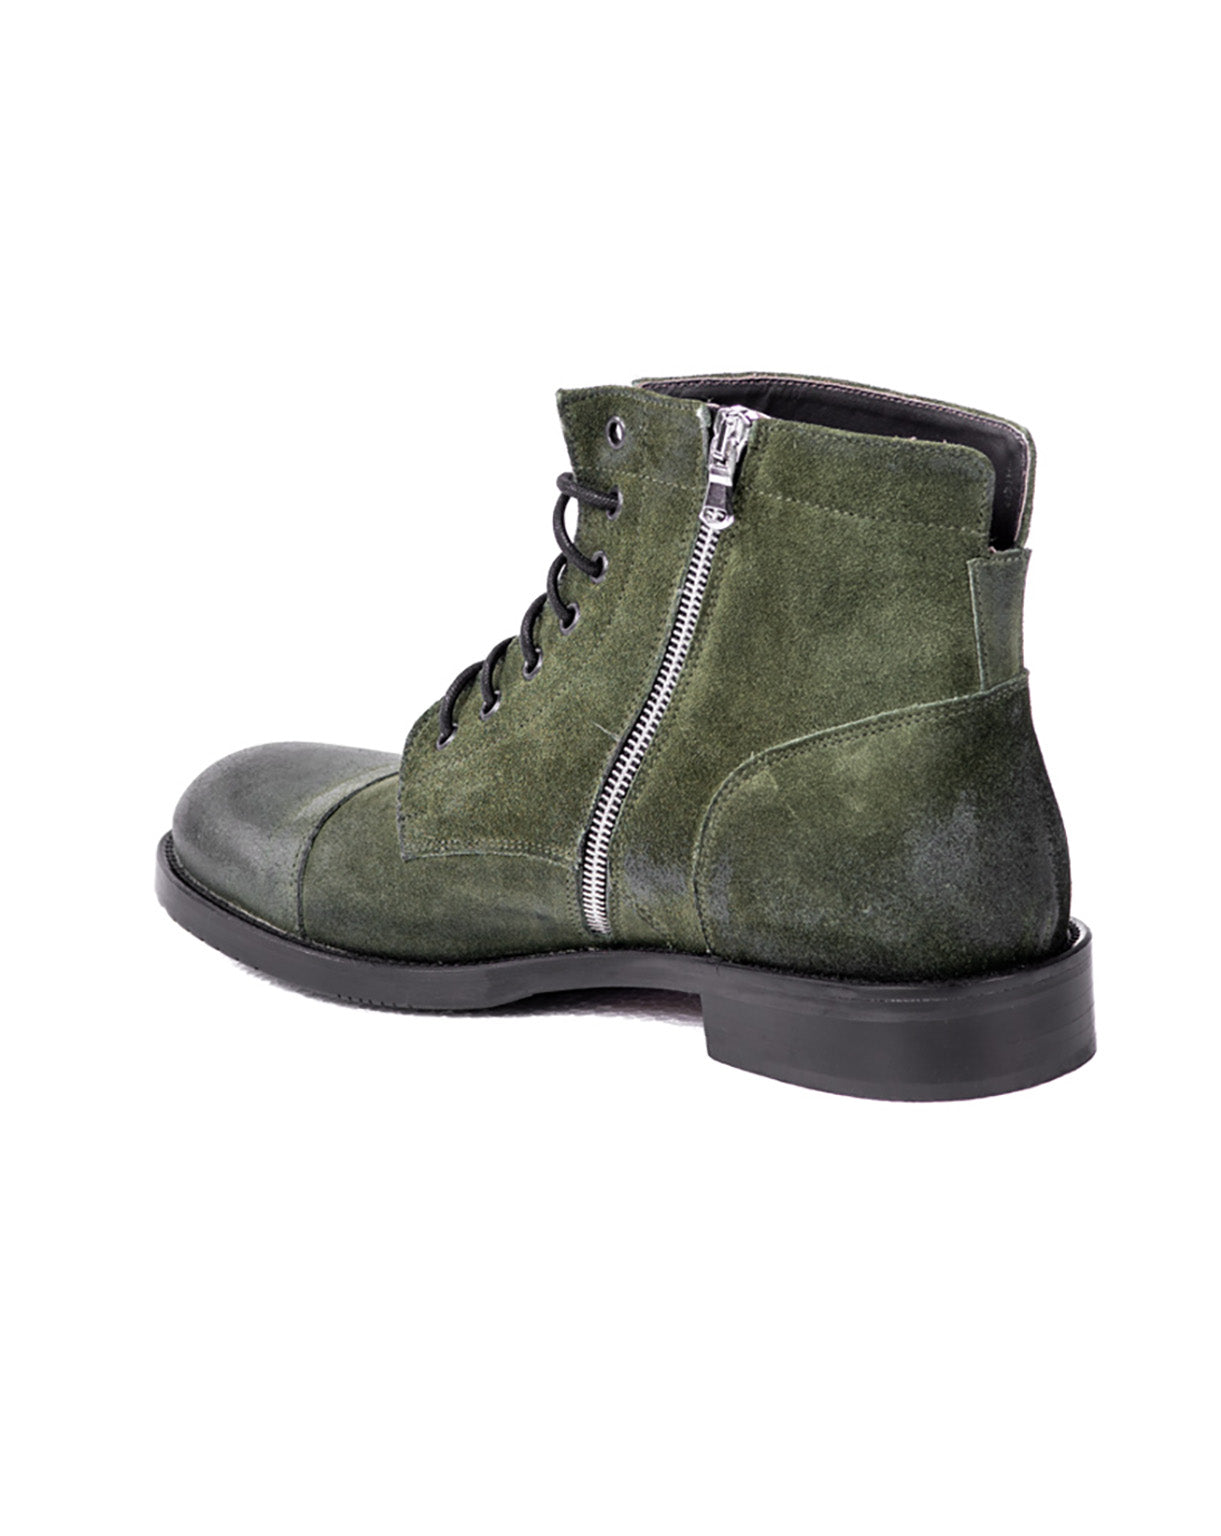 DAVY - GREEN SUEDE ANKLE BOOT WITH ZIP